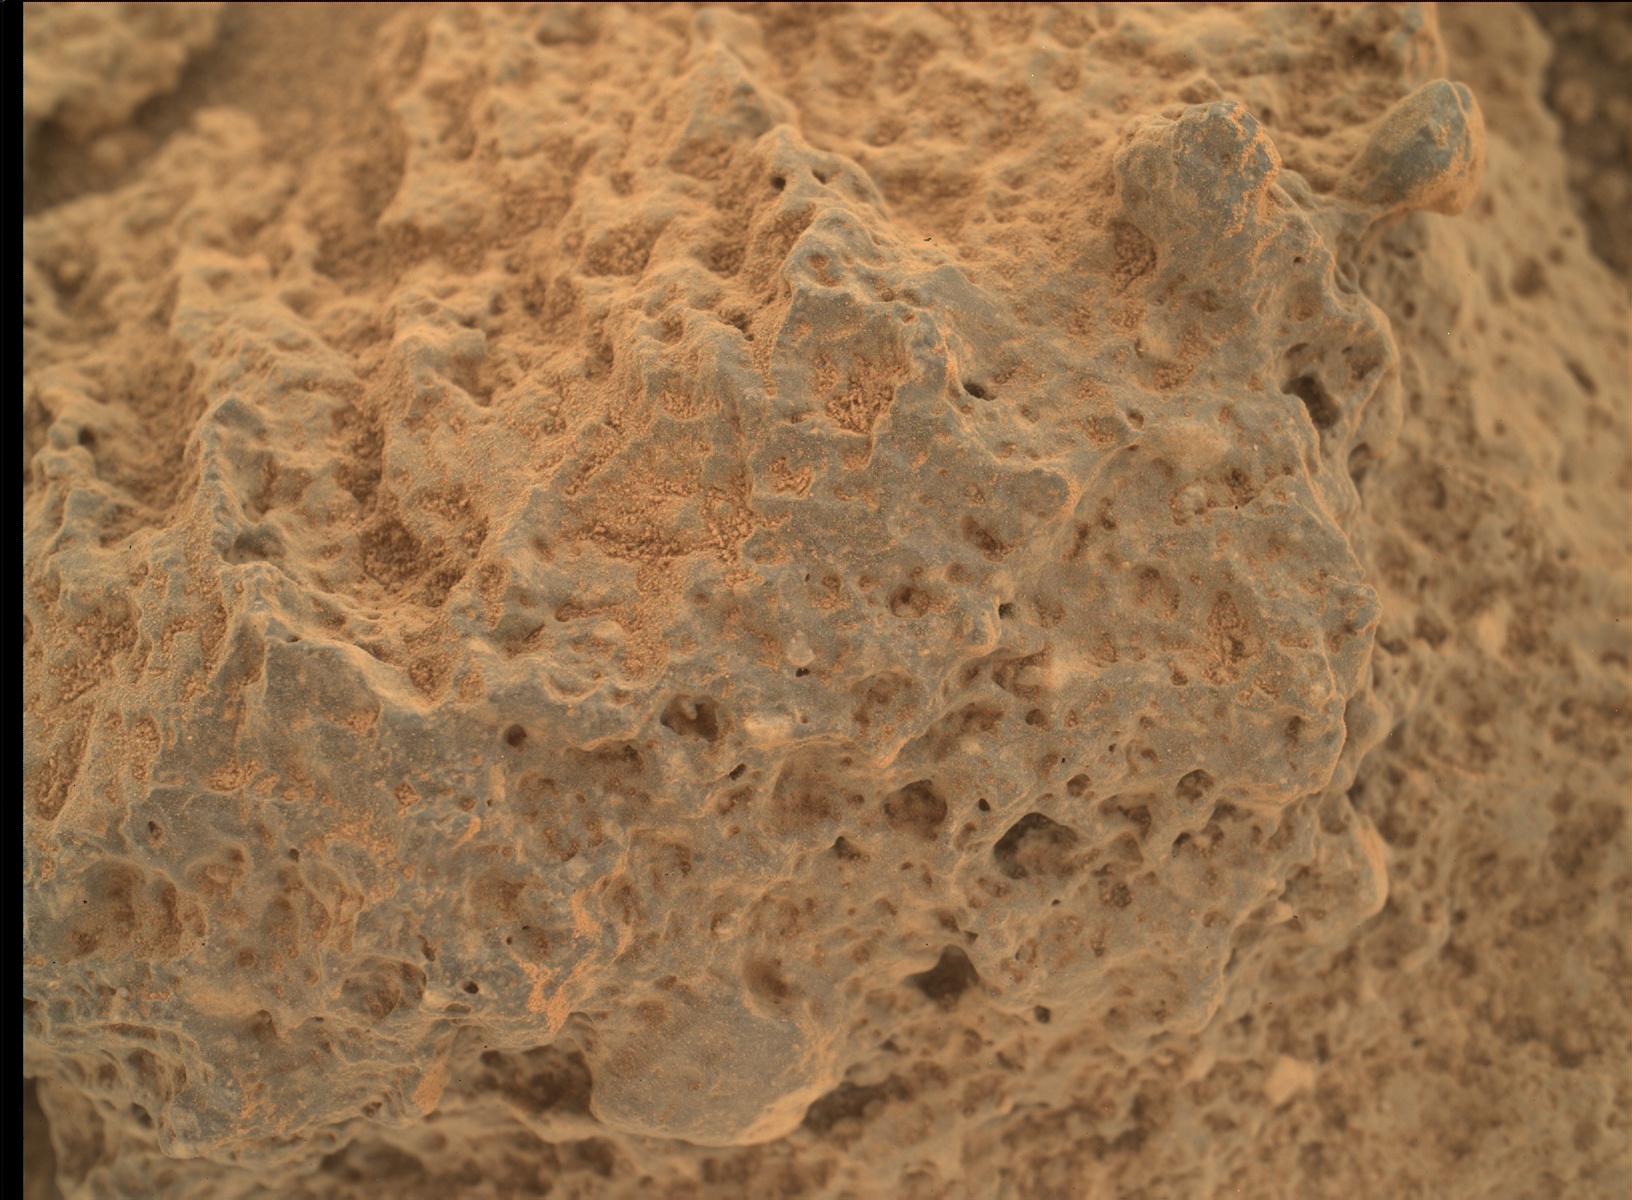 Nasa's Mars rover Curiosity acquired this image using its Mars Hand Lens Imager (MAHLI) on Sol 506